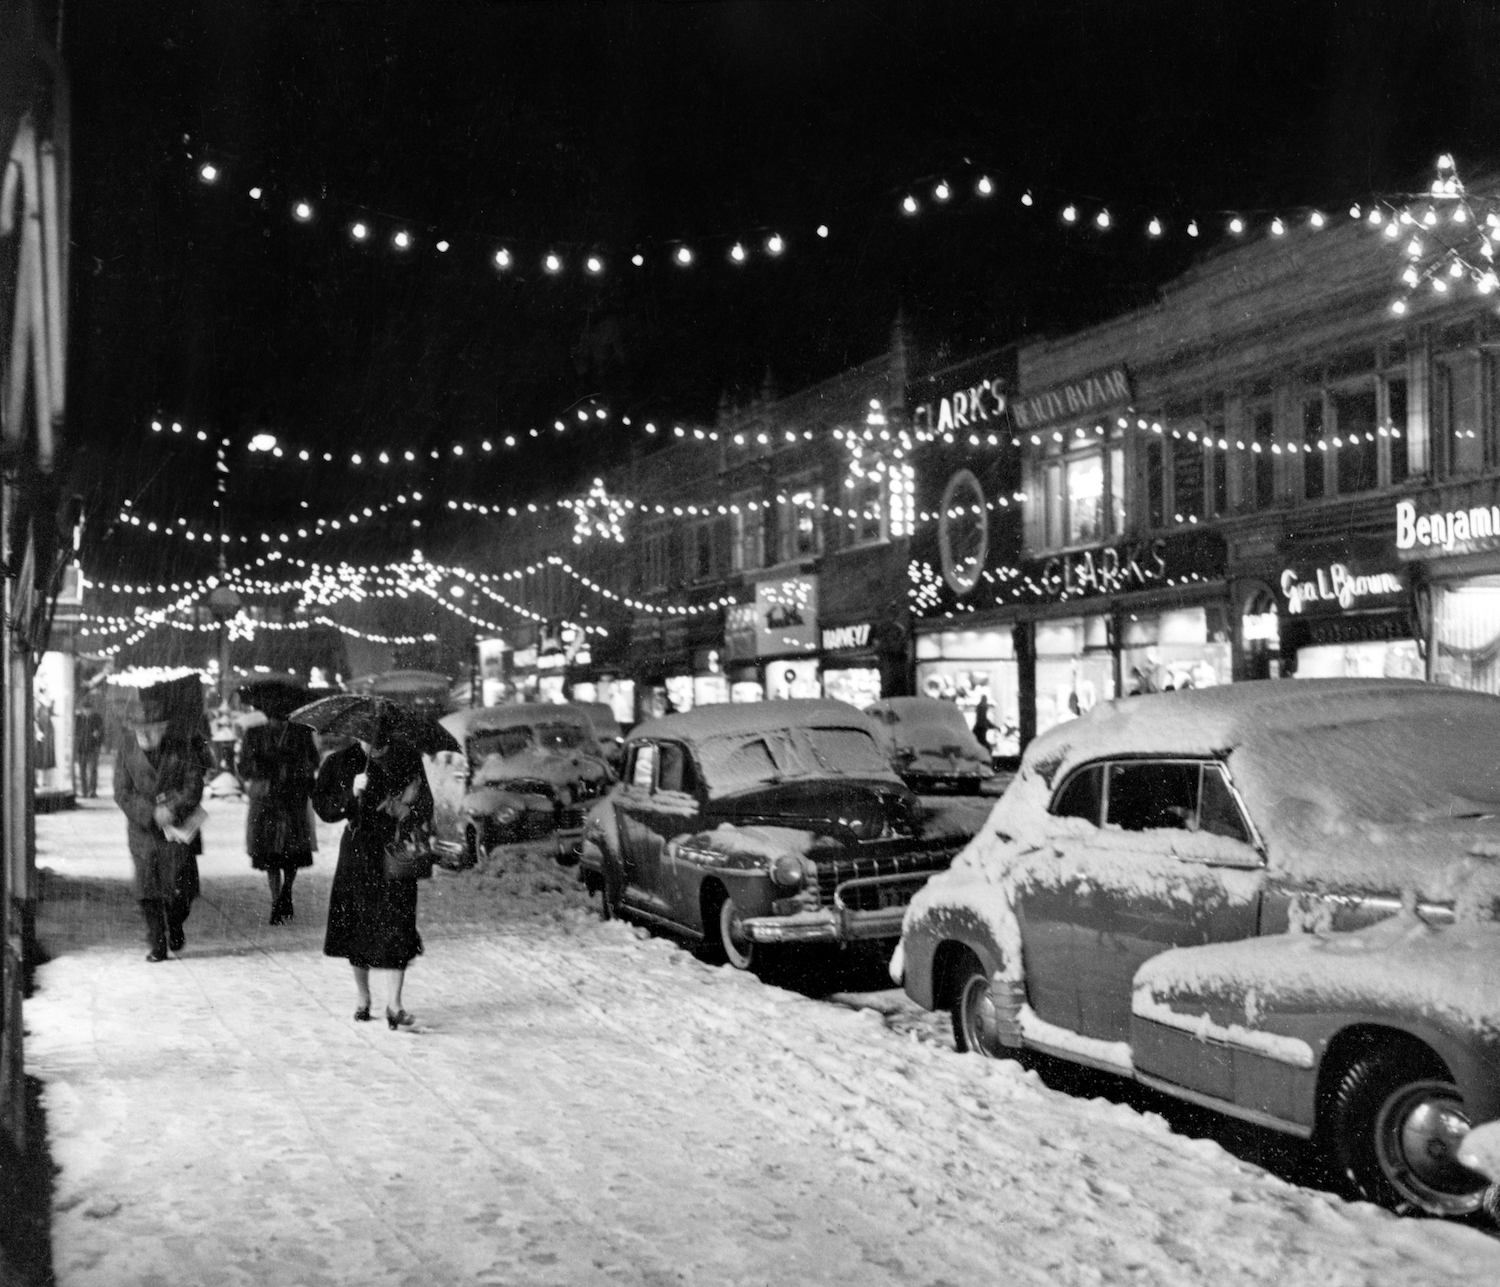 Cars parked on a snowy street. Cold weather is one reason you'll Regret Living in a Car Full Time. | H. Armstrong Roberts/ClassicStock/Getty Images